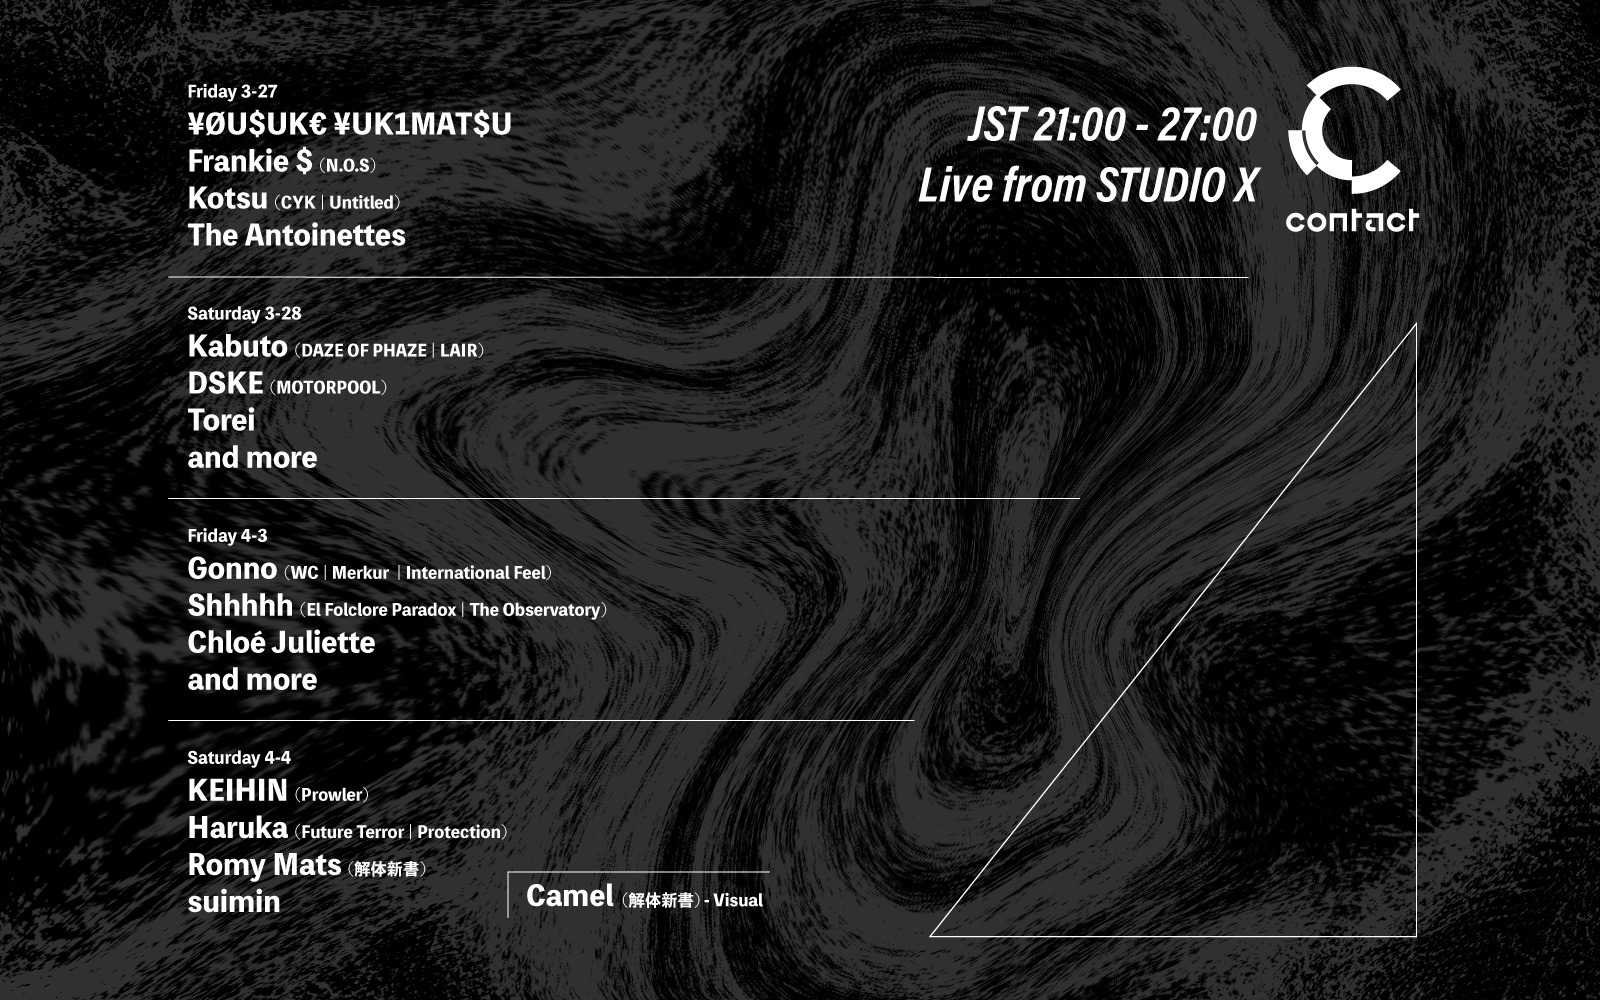 Live from Studio X Contact Tokyo